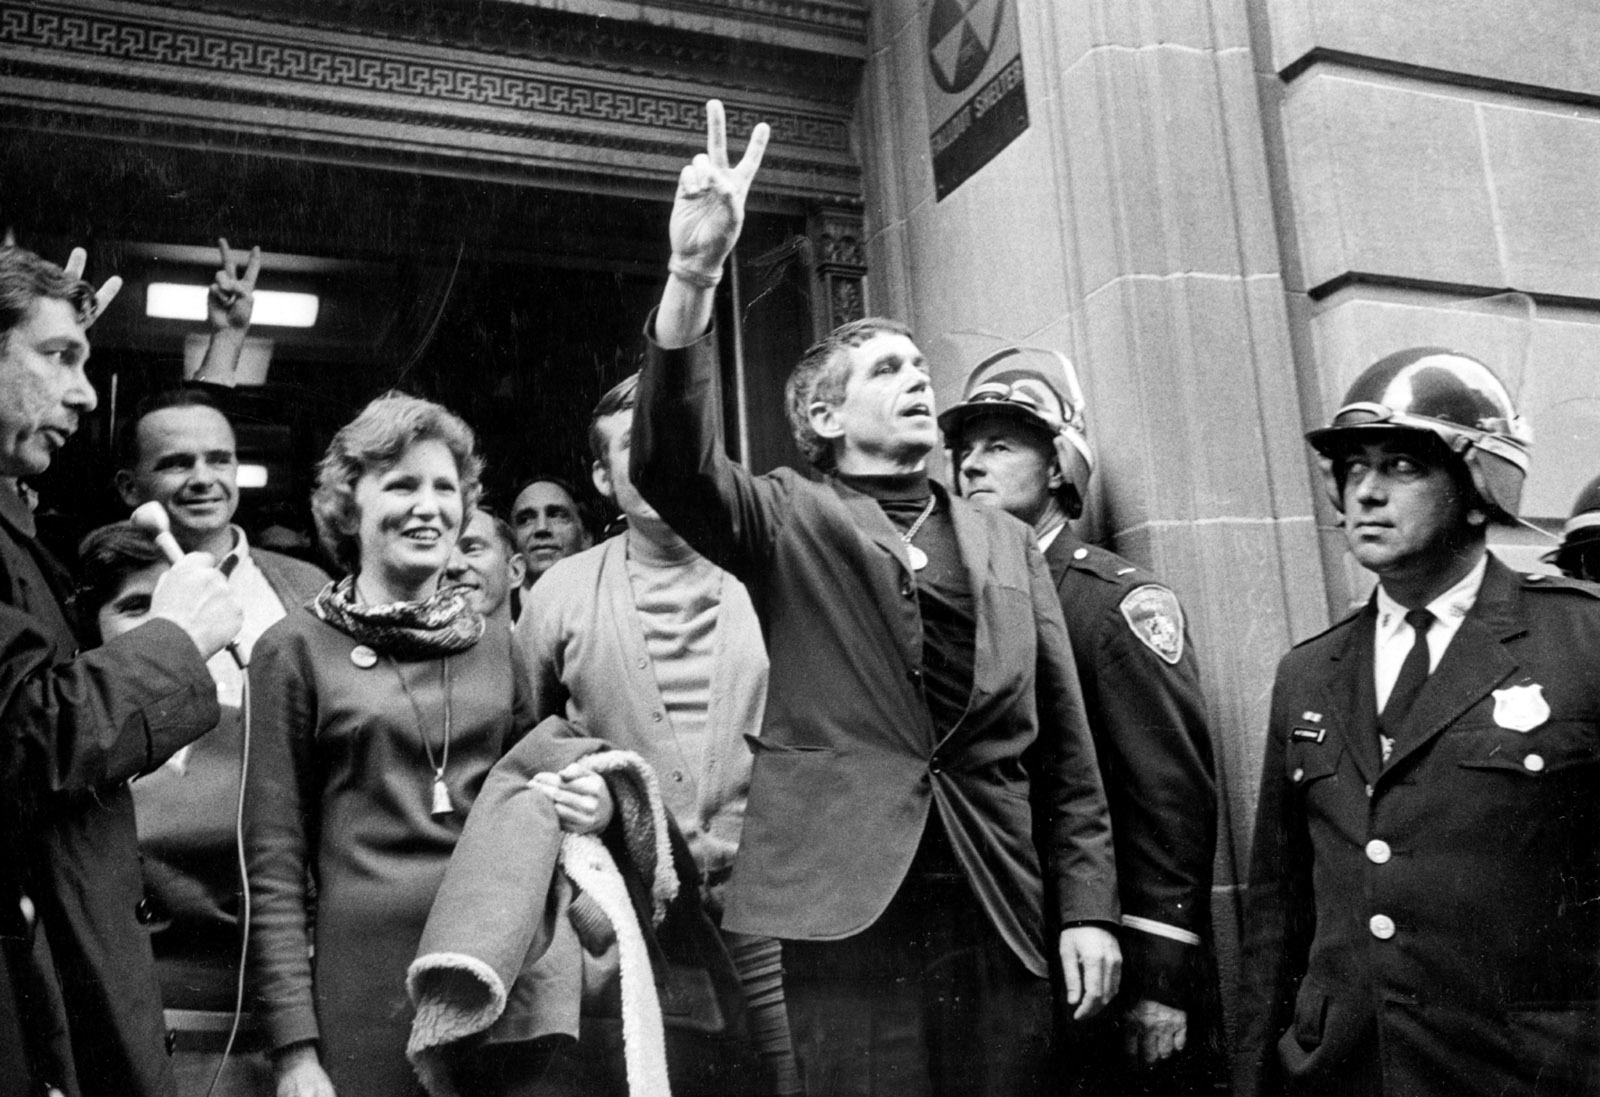 Catonsville Nine members Mary Moylan and Daniel Berrigan leaving the Baltimore federal courthouse at the time of their trial for burning draft files to protest the Vietnam War, October 1968